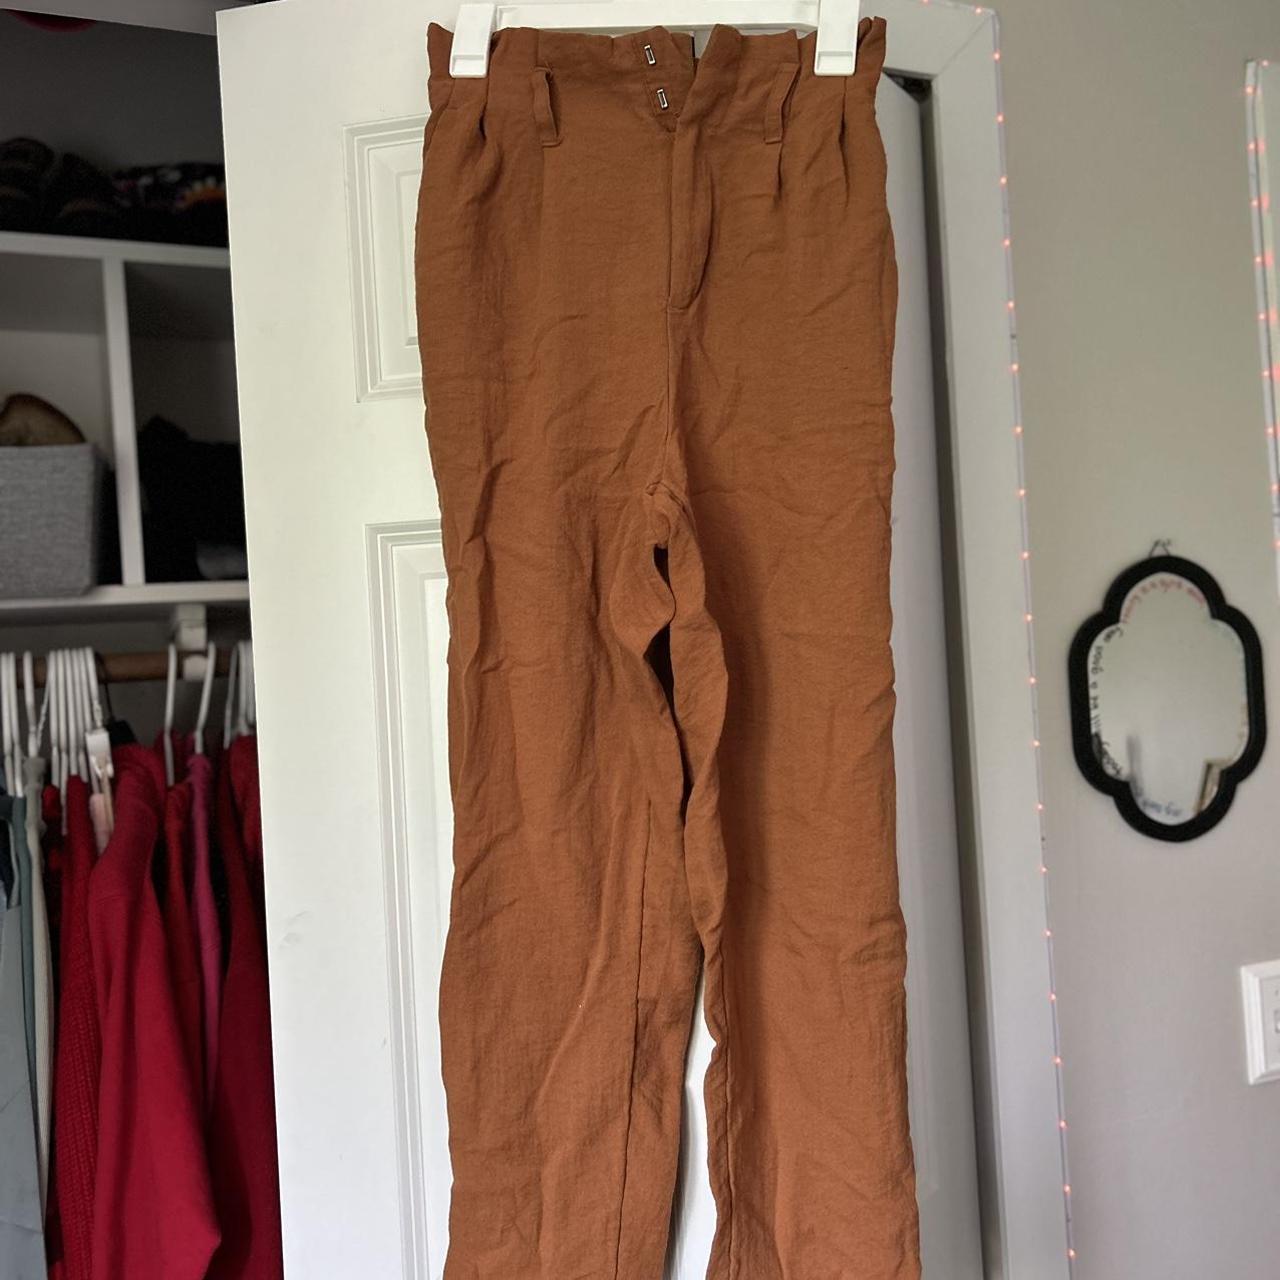 Super cute paper bag waist pants from Target! Can be